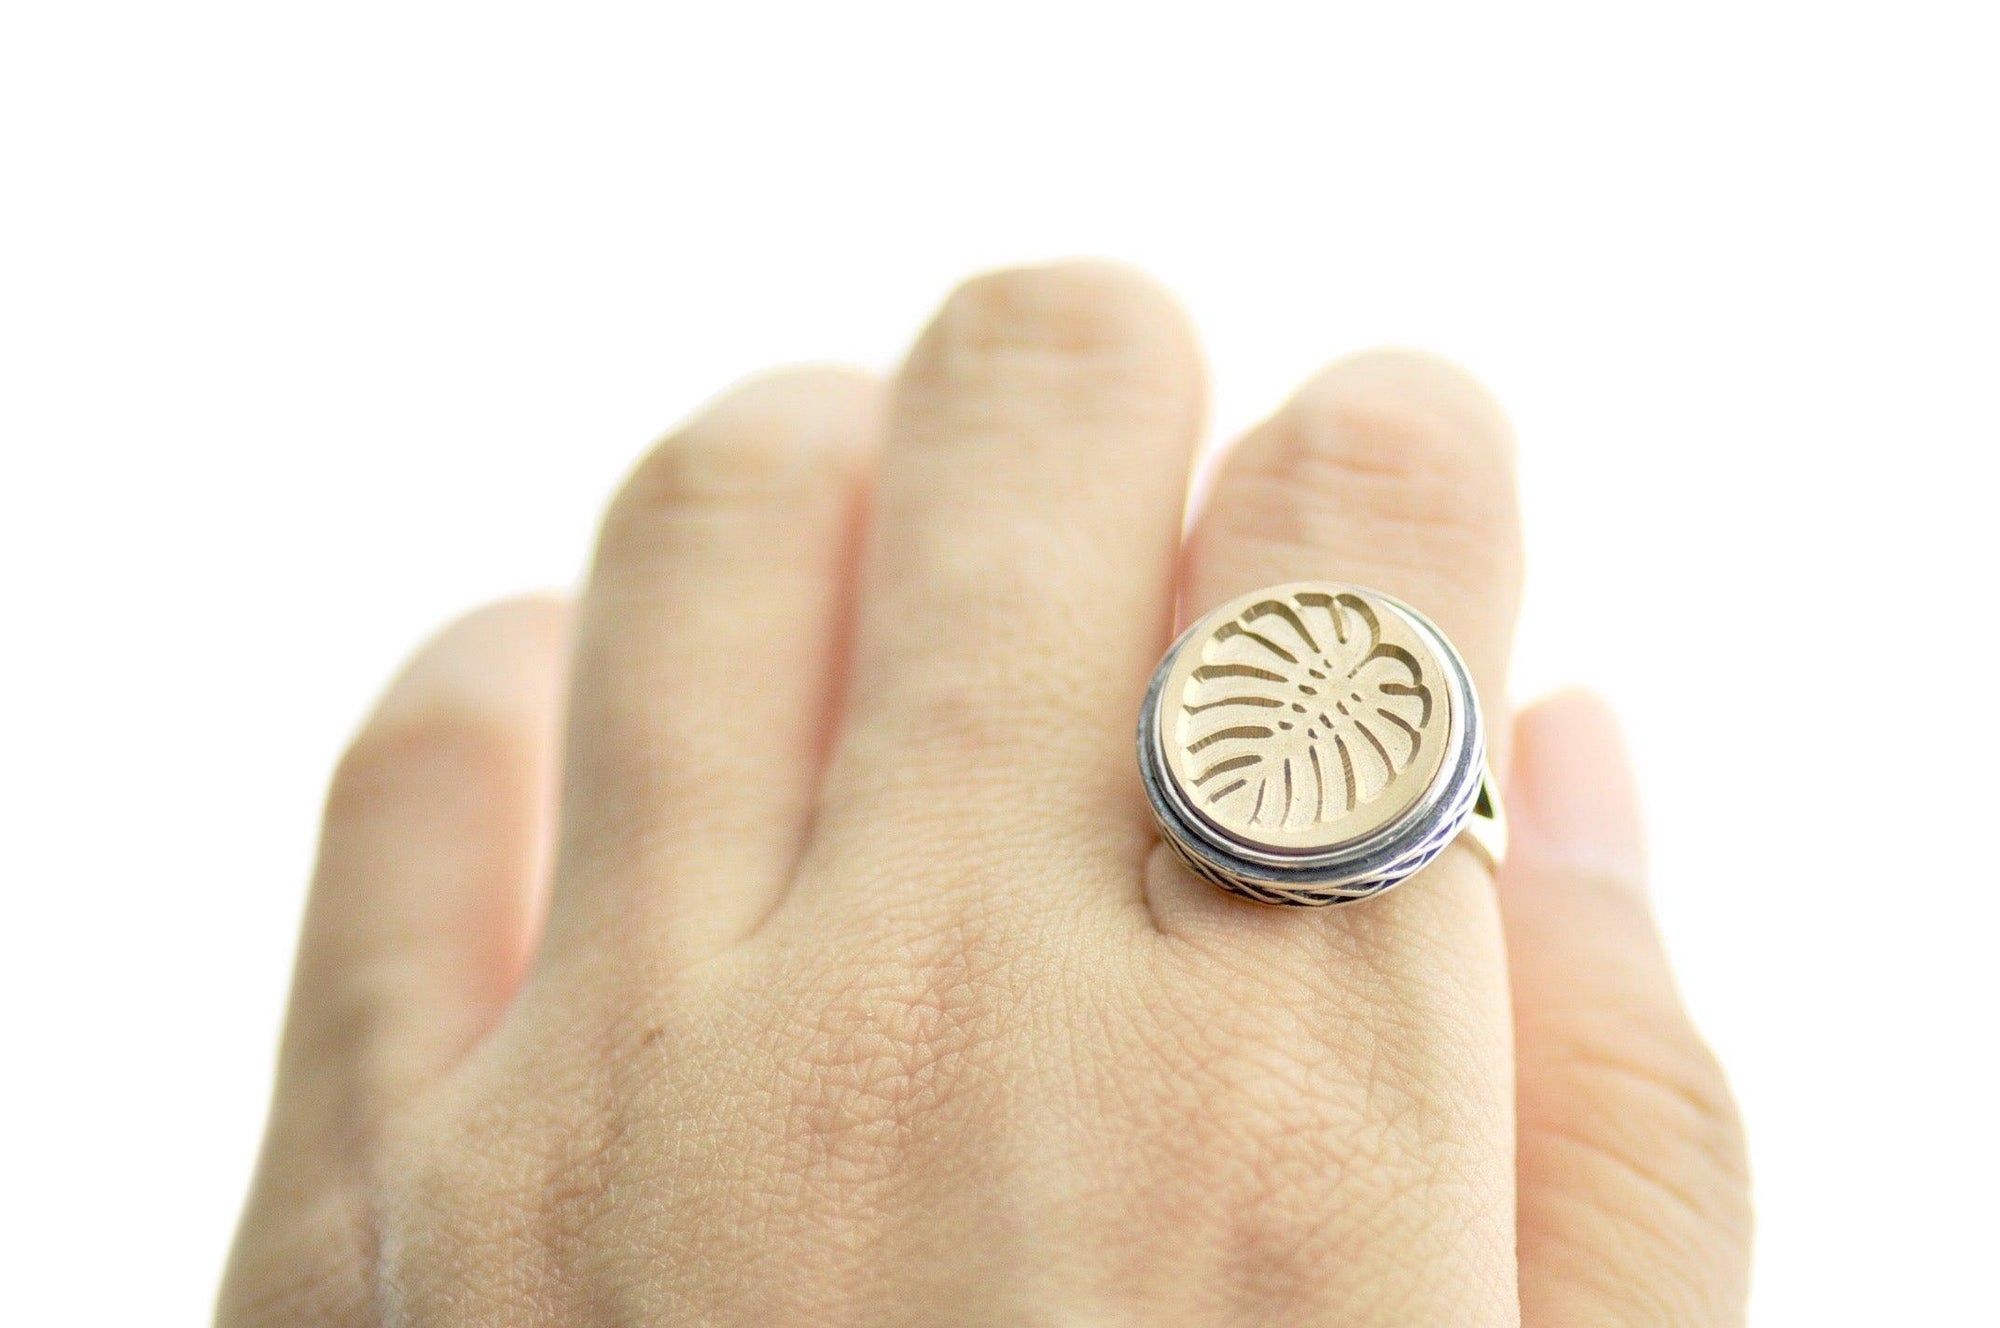 Monstera Signet Ring - Backtozero B20 - 15c, 15mm, 15mm ring, accessory, Botanical, her, jewelry, Leaf, monstera, Nature, Plant, ring, signet ring, size 10, size 5, size 6, size 7, size 8, size 9, wax seal, wax seal stamp